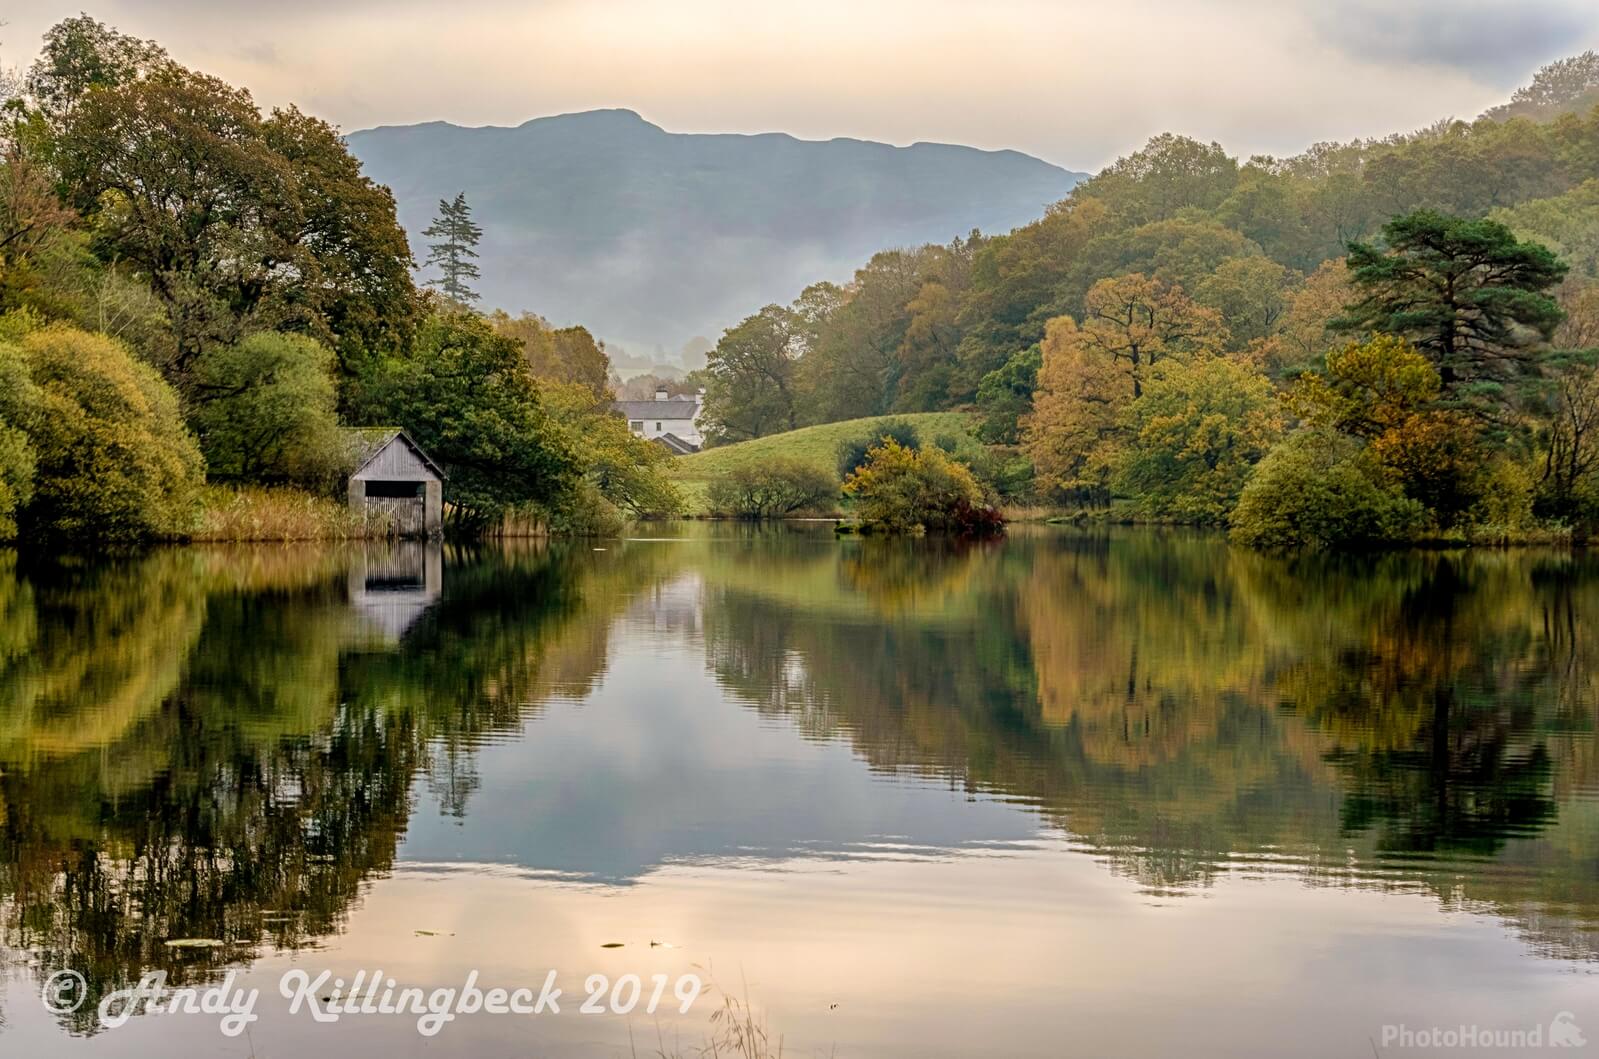 Image of Rydal Water, Lake District by Andy Killingbeck